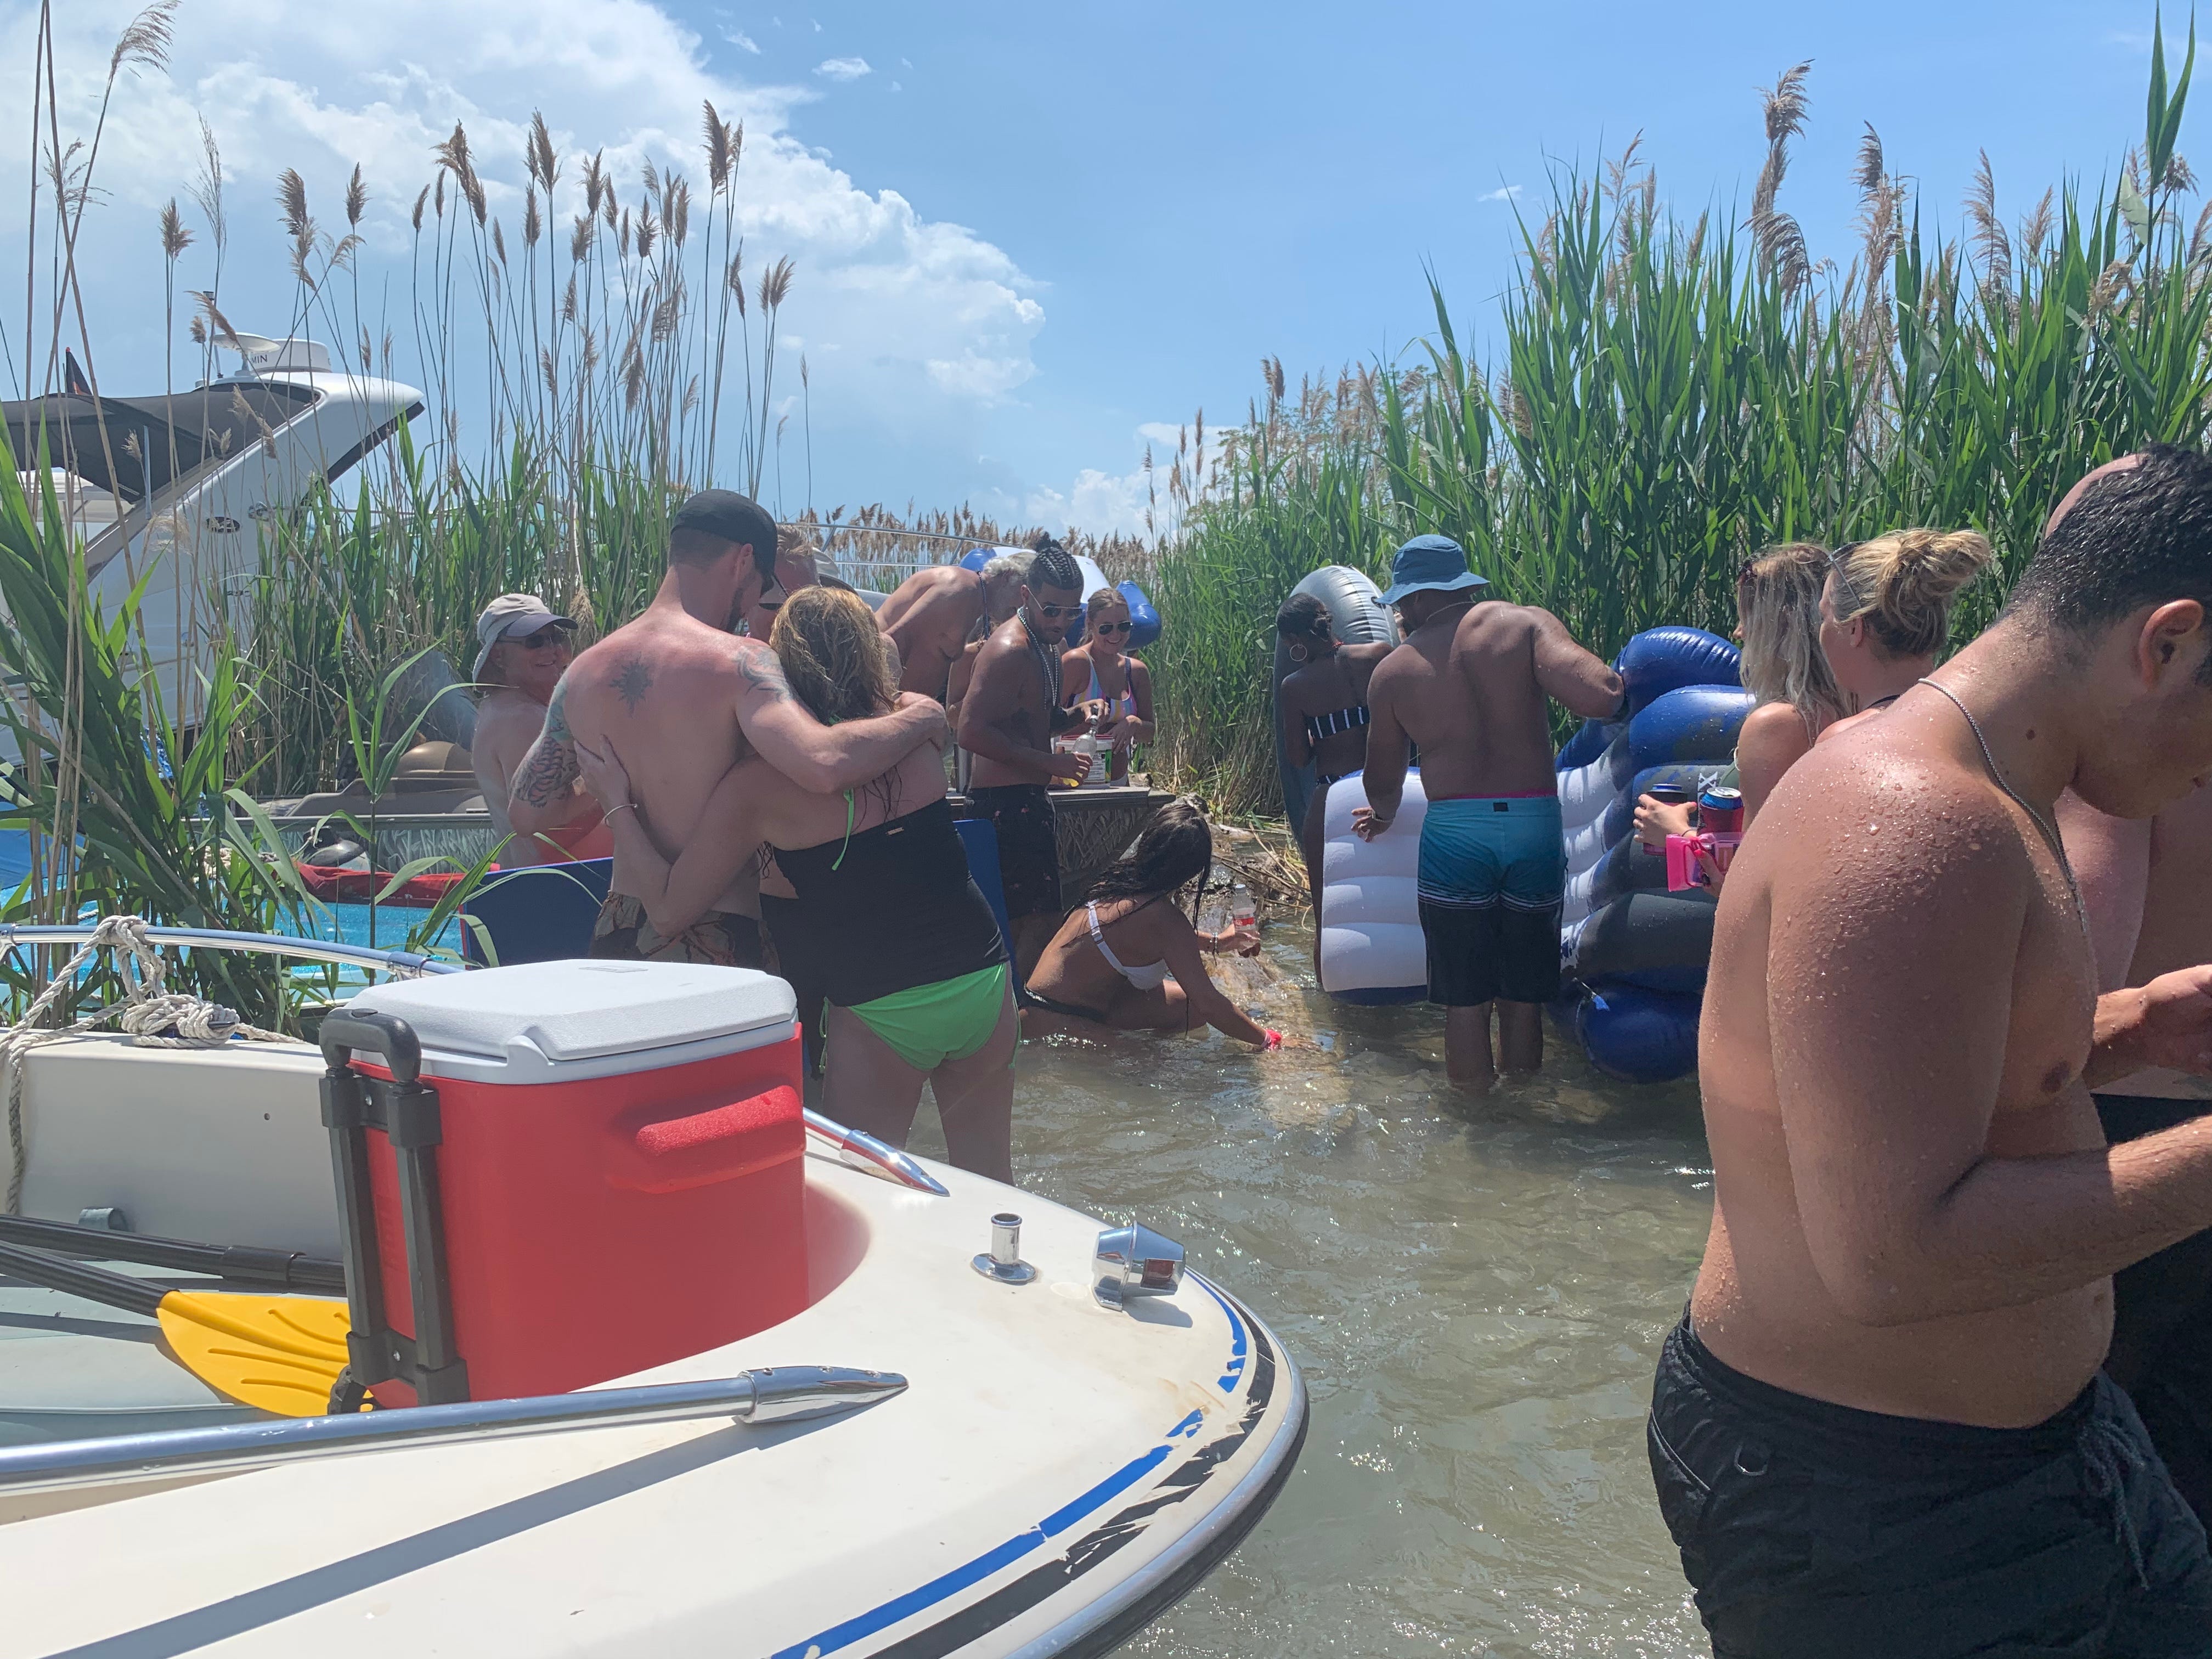 Jobbie Nooner revelers congragate in the shallow water on what was a beach area in previous years...  eliminated this year by high lake water levels on Lake St. Clair at Gull Island.